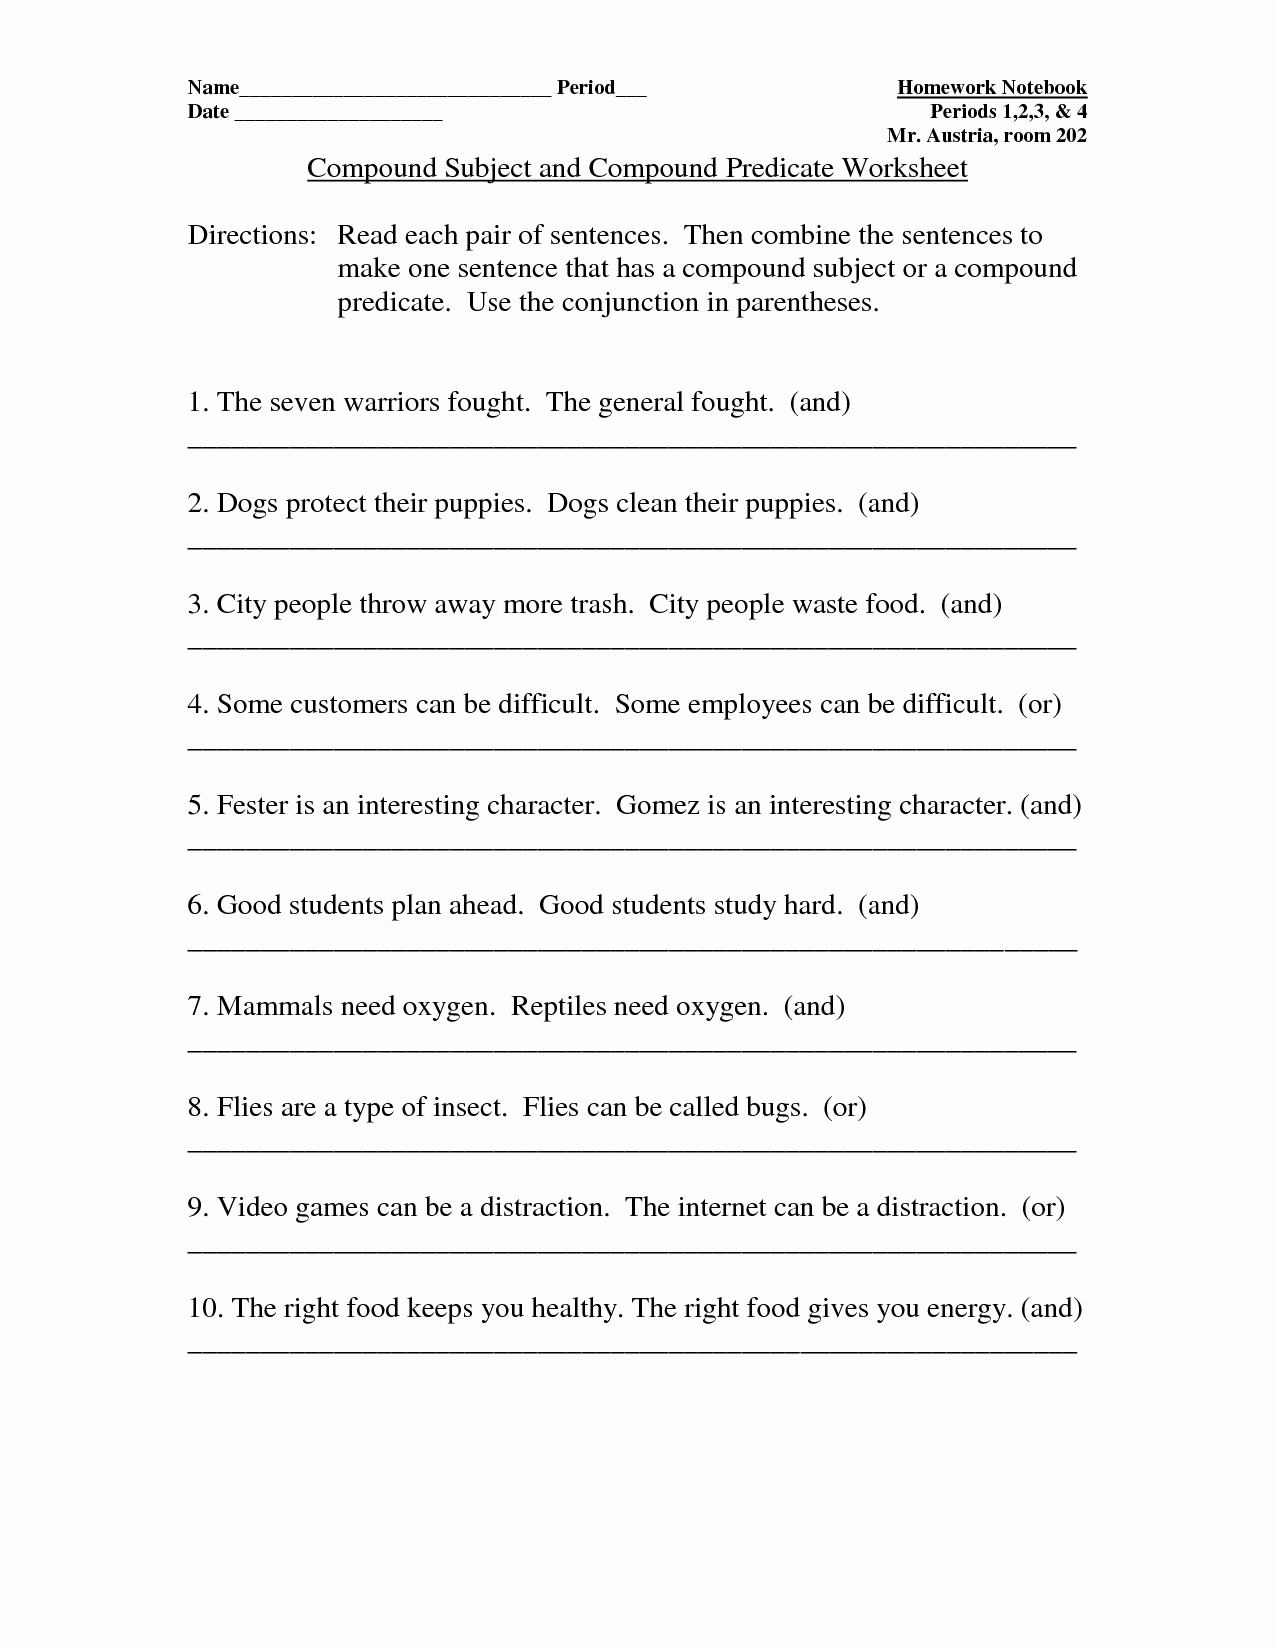 Complex Sentence Worksheets 4th Grade Lovely Subject Predicate Worksheet 4th Grade Pdf English